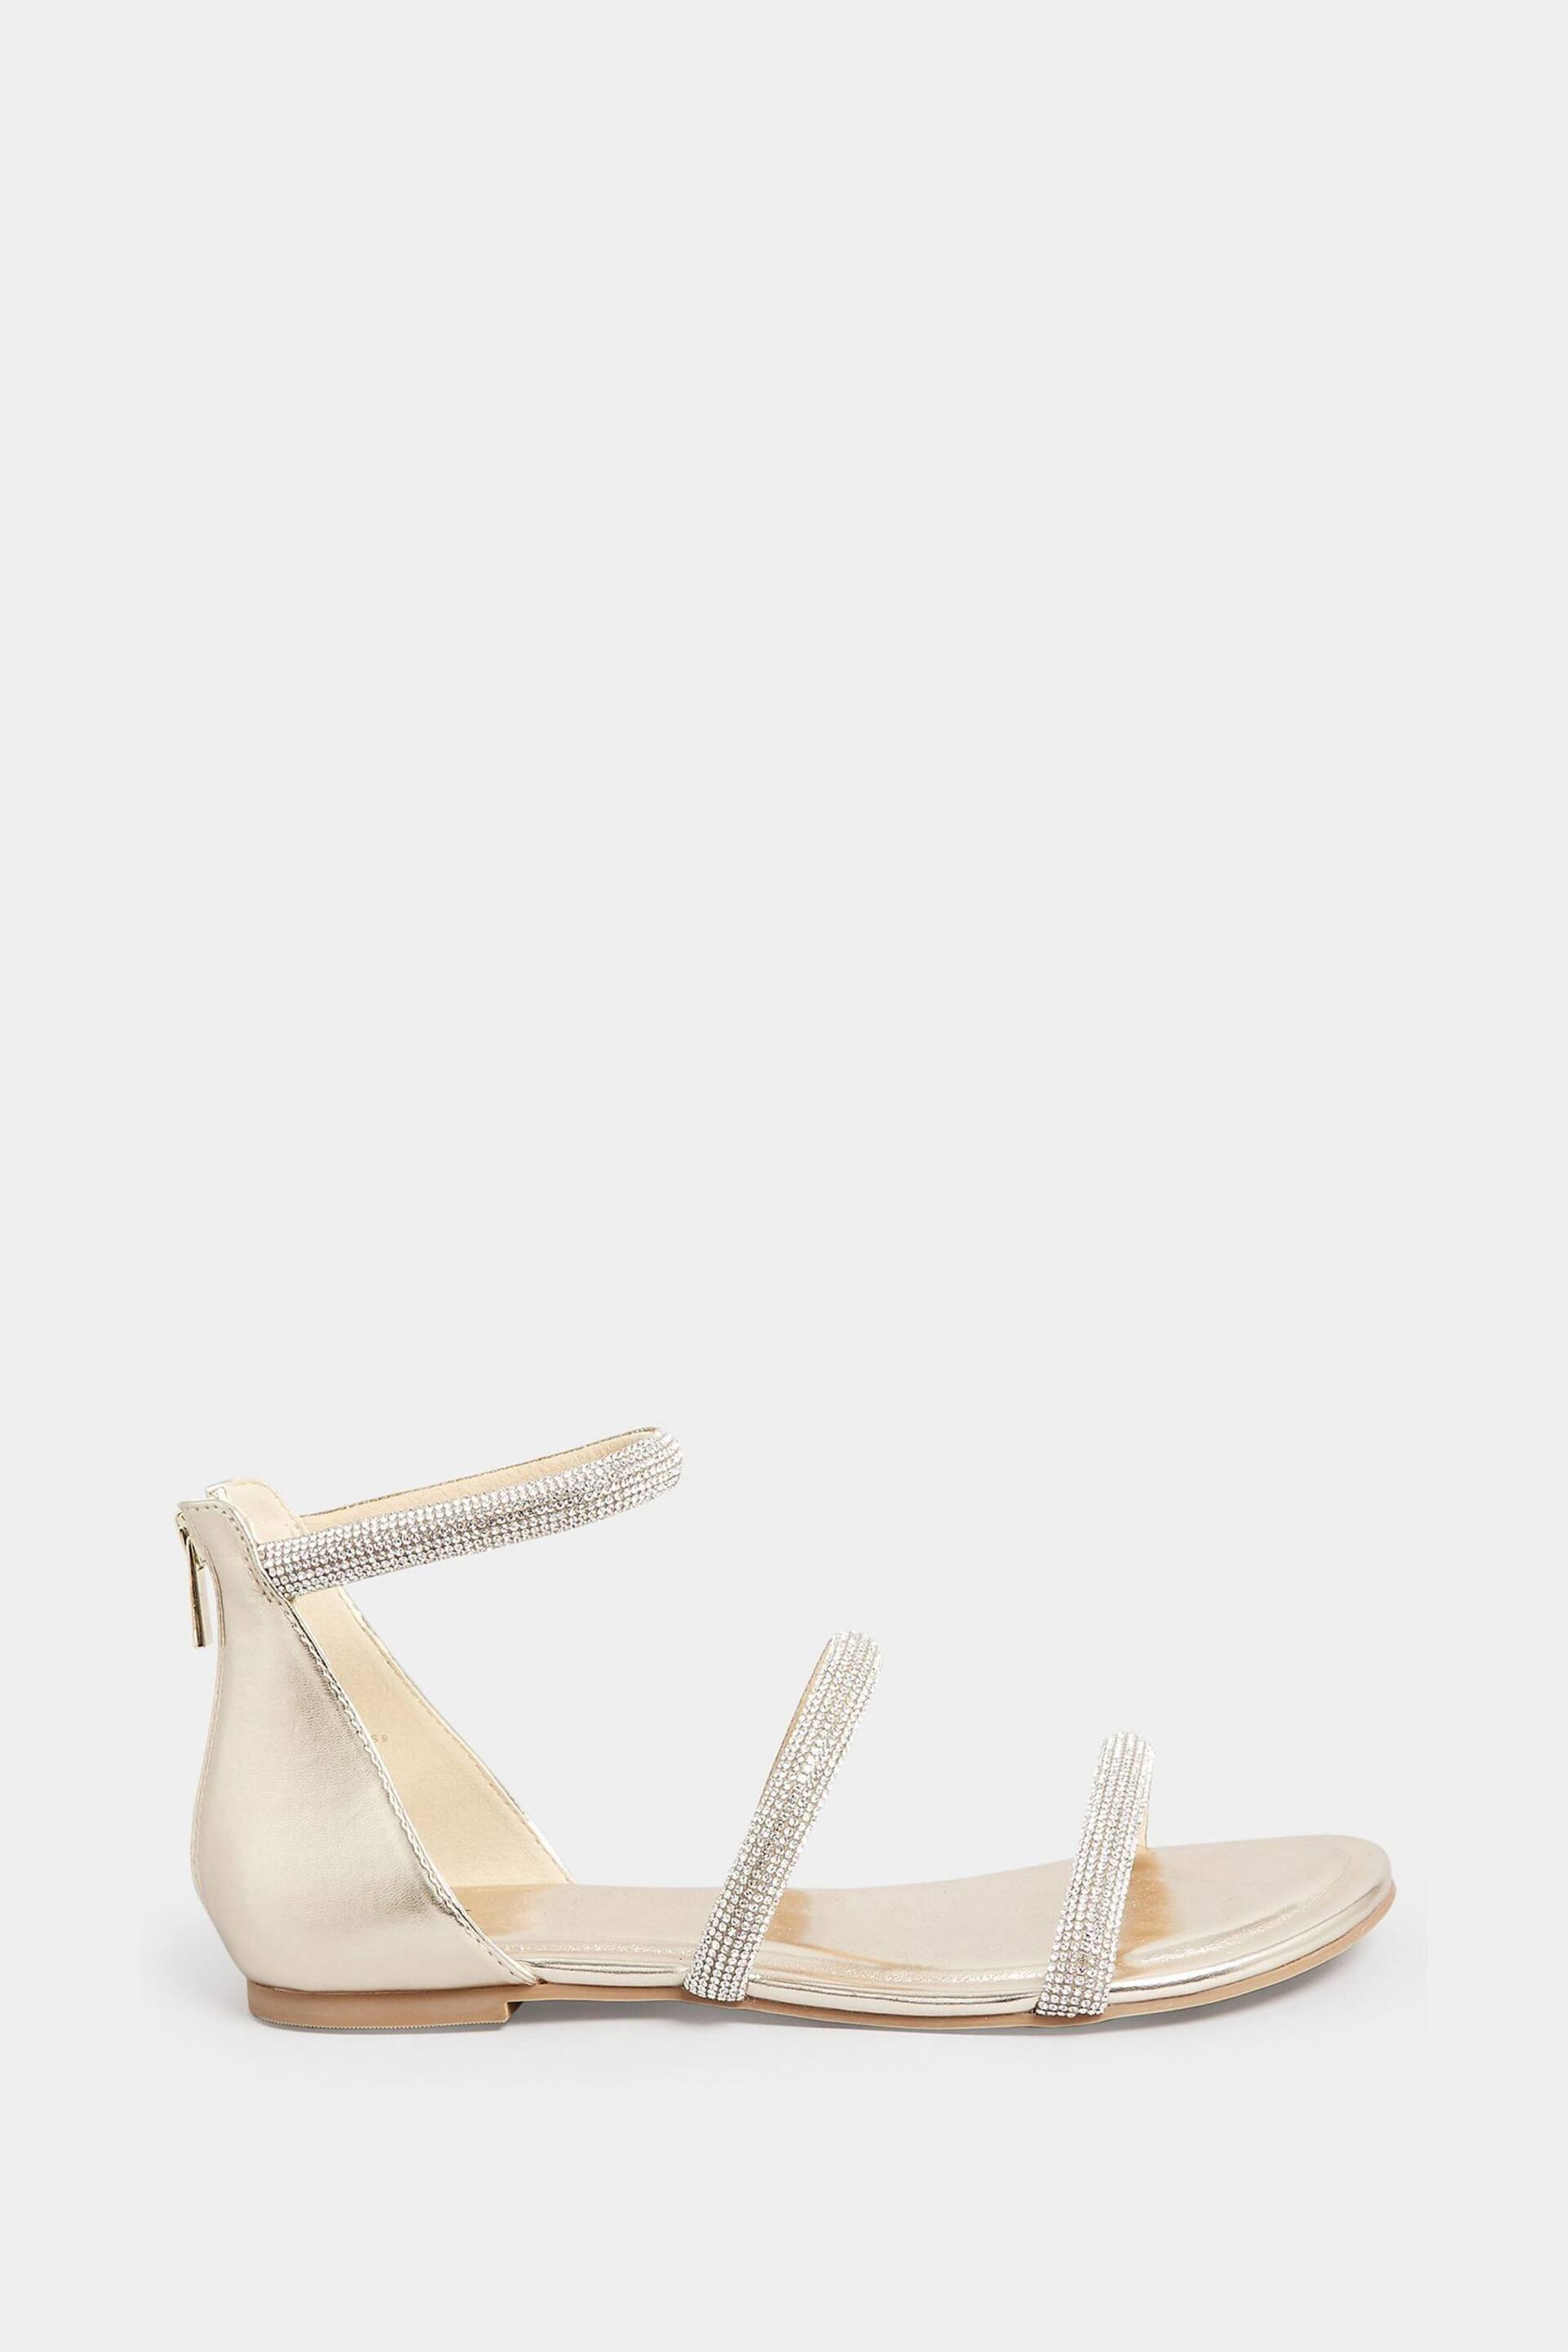 Long Tall Sally Gold Diamante Strap Flat Sandals - Image 1 of 4